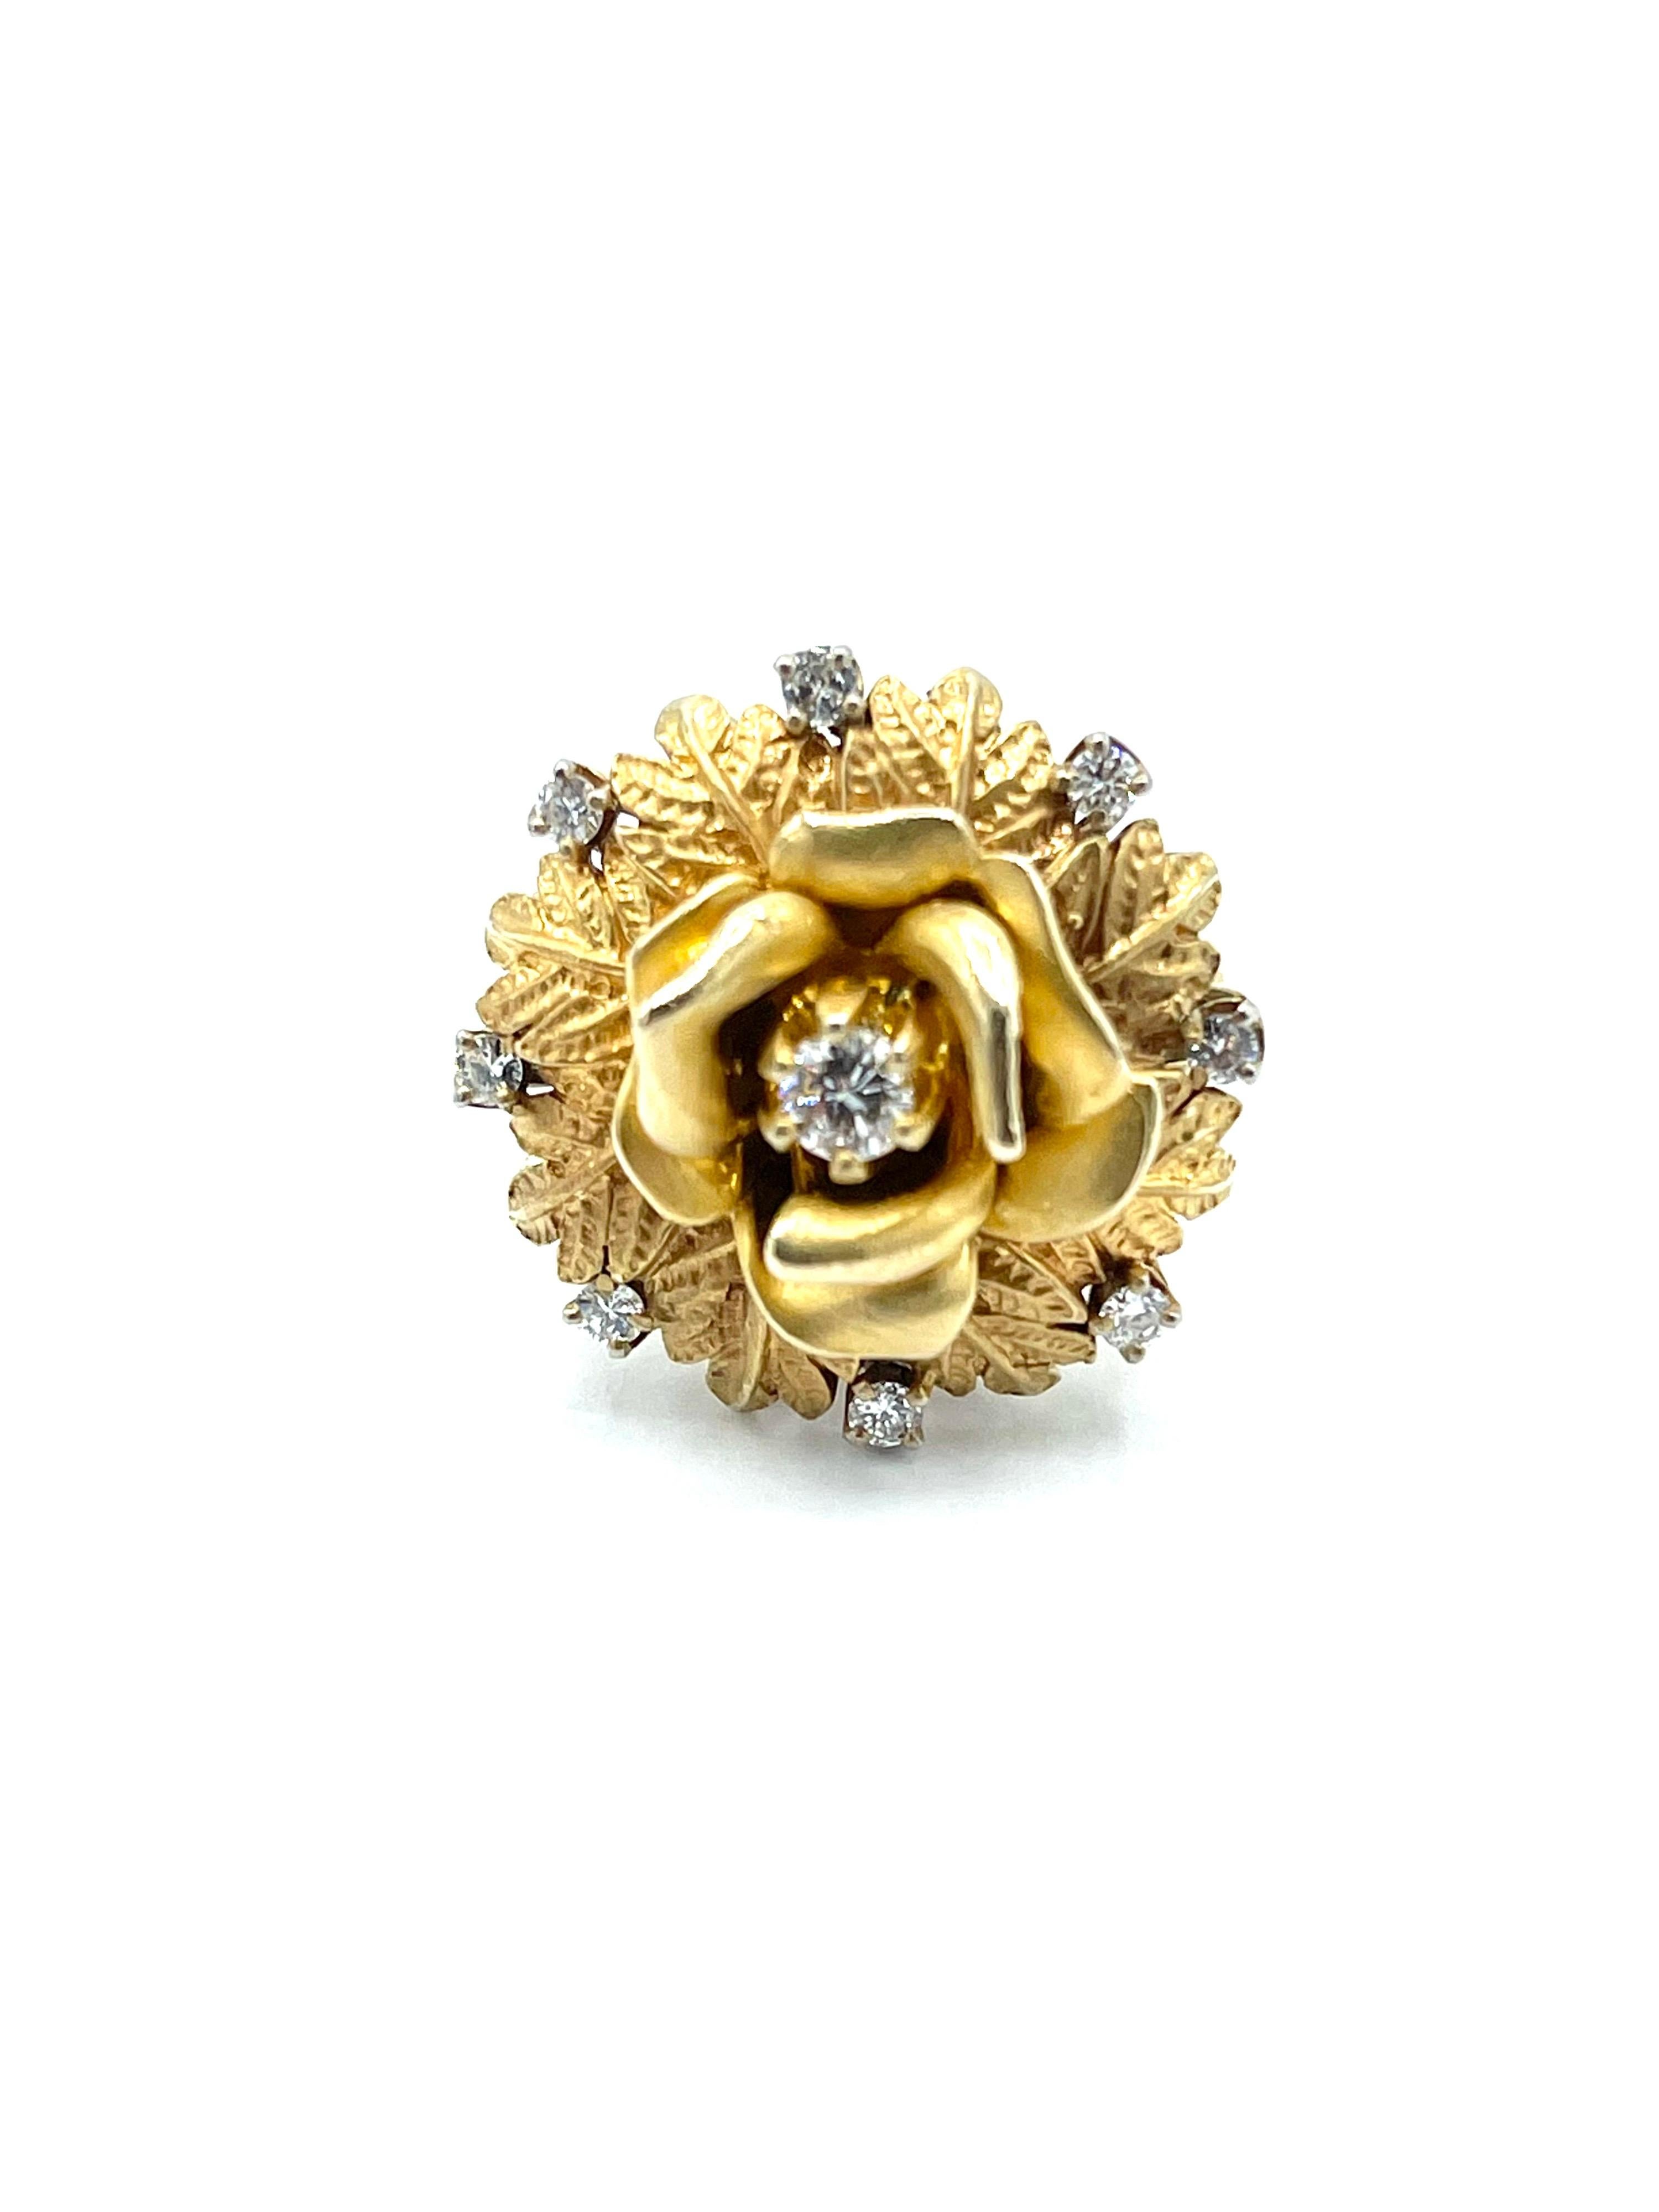 A whimsical Diamond flower cocktail ring!  The center Diamond is set with six prongs in the center of a blossoming flower, with eight more round brilliant cut Diamonds around the outside foliage.  The nine Diamonds have a total weight of .36 carats,